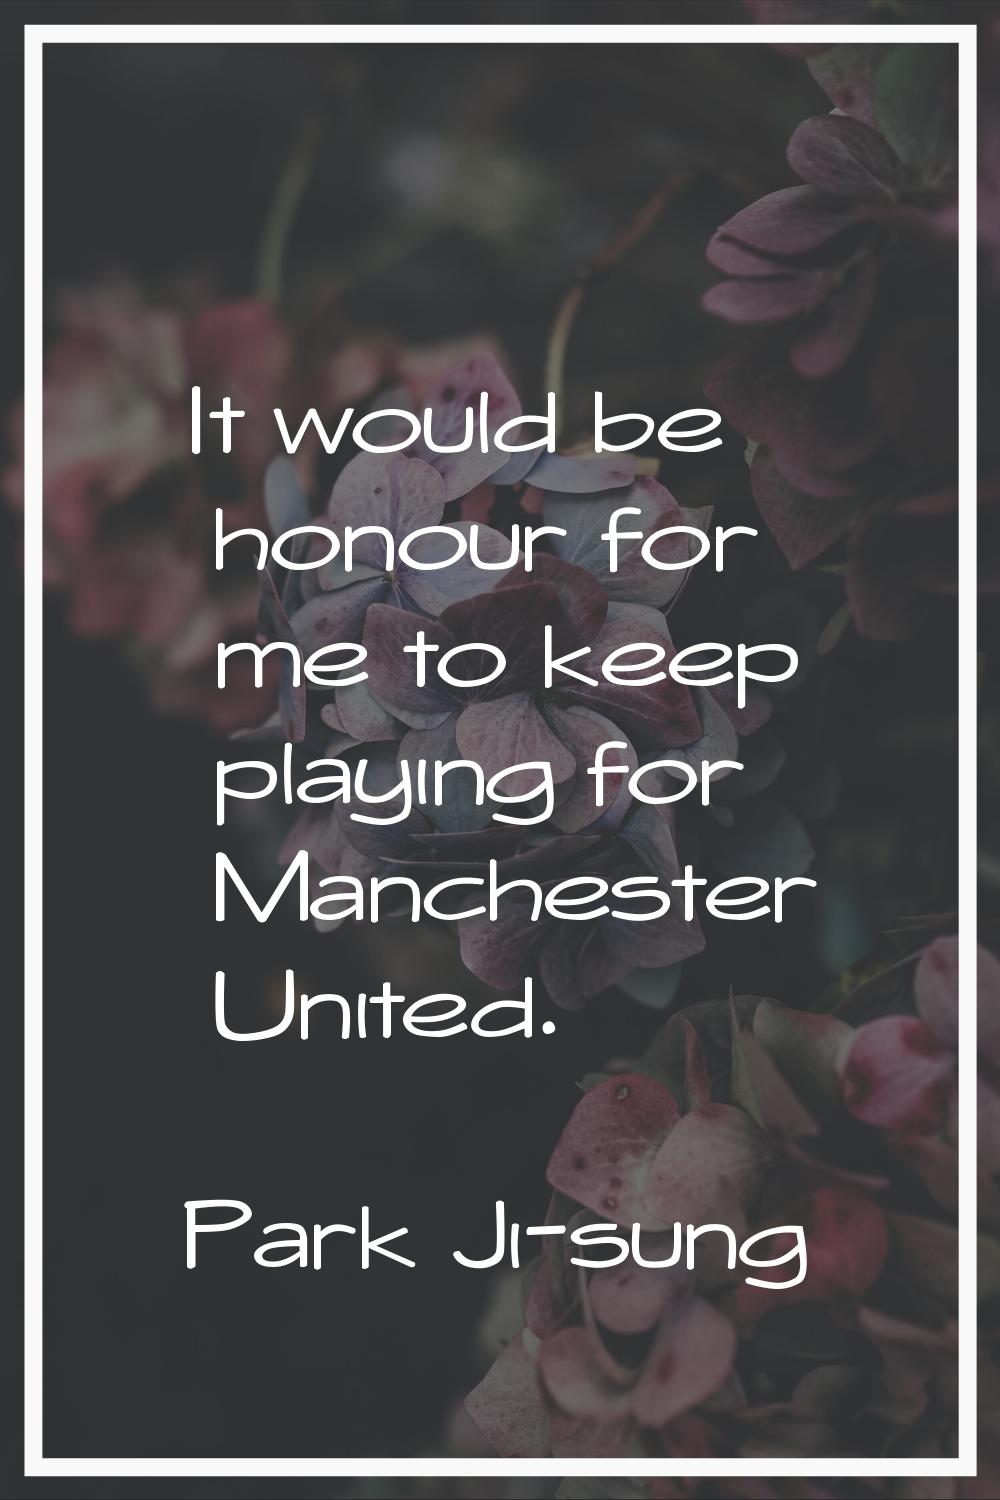 It would be honour for me to keep playing for Manchester United.